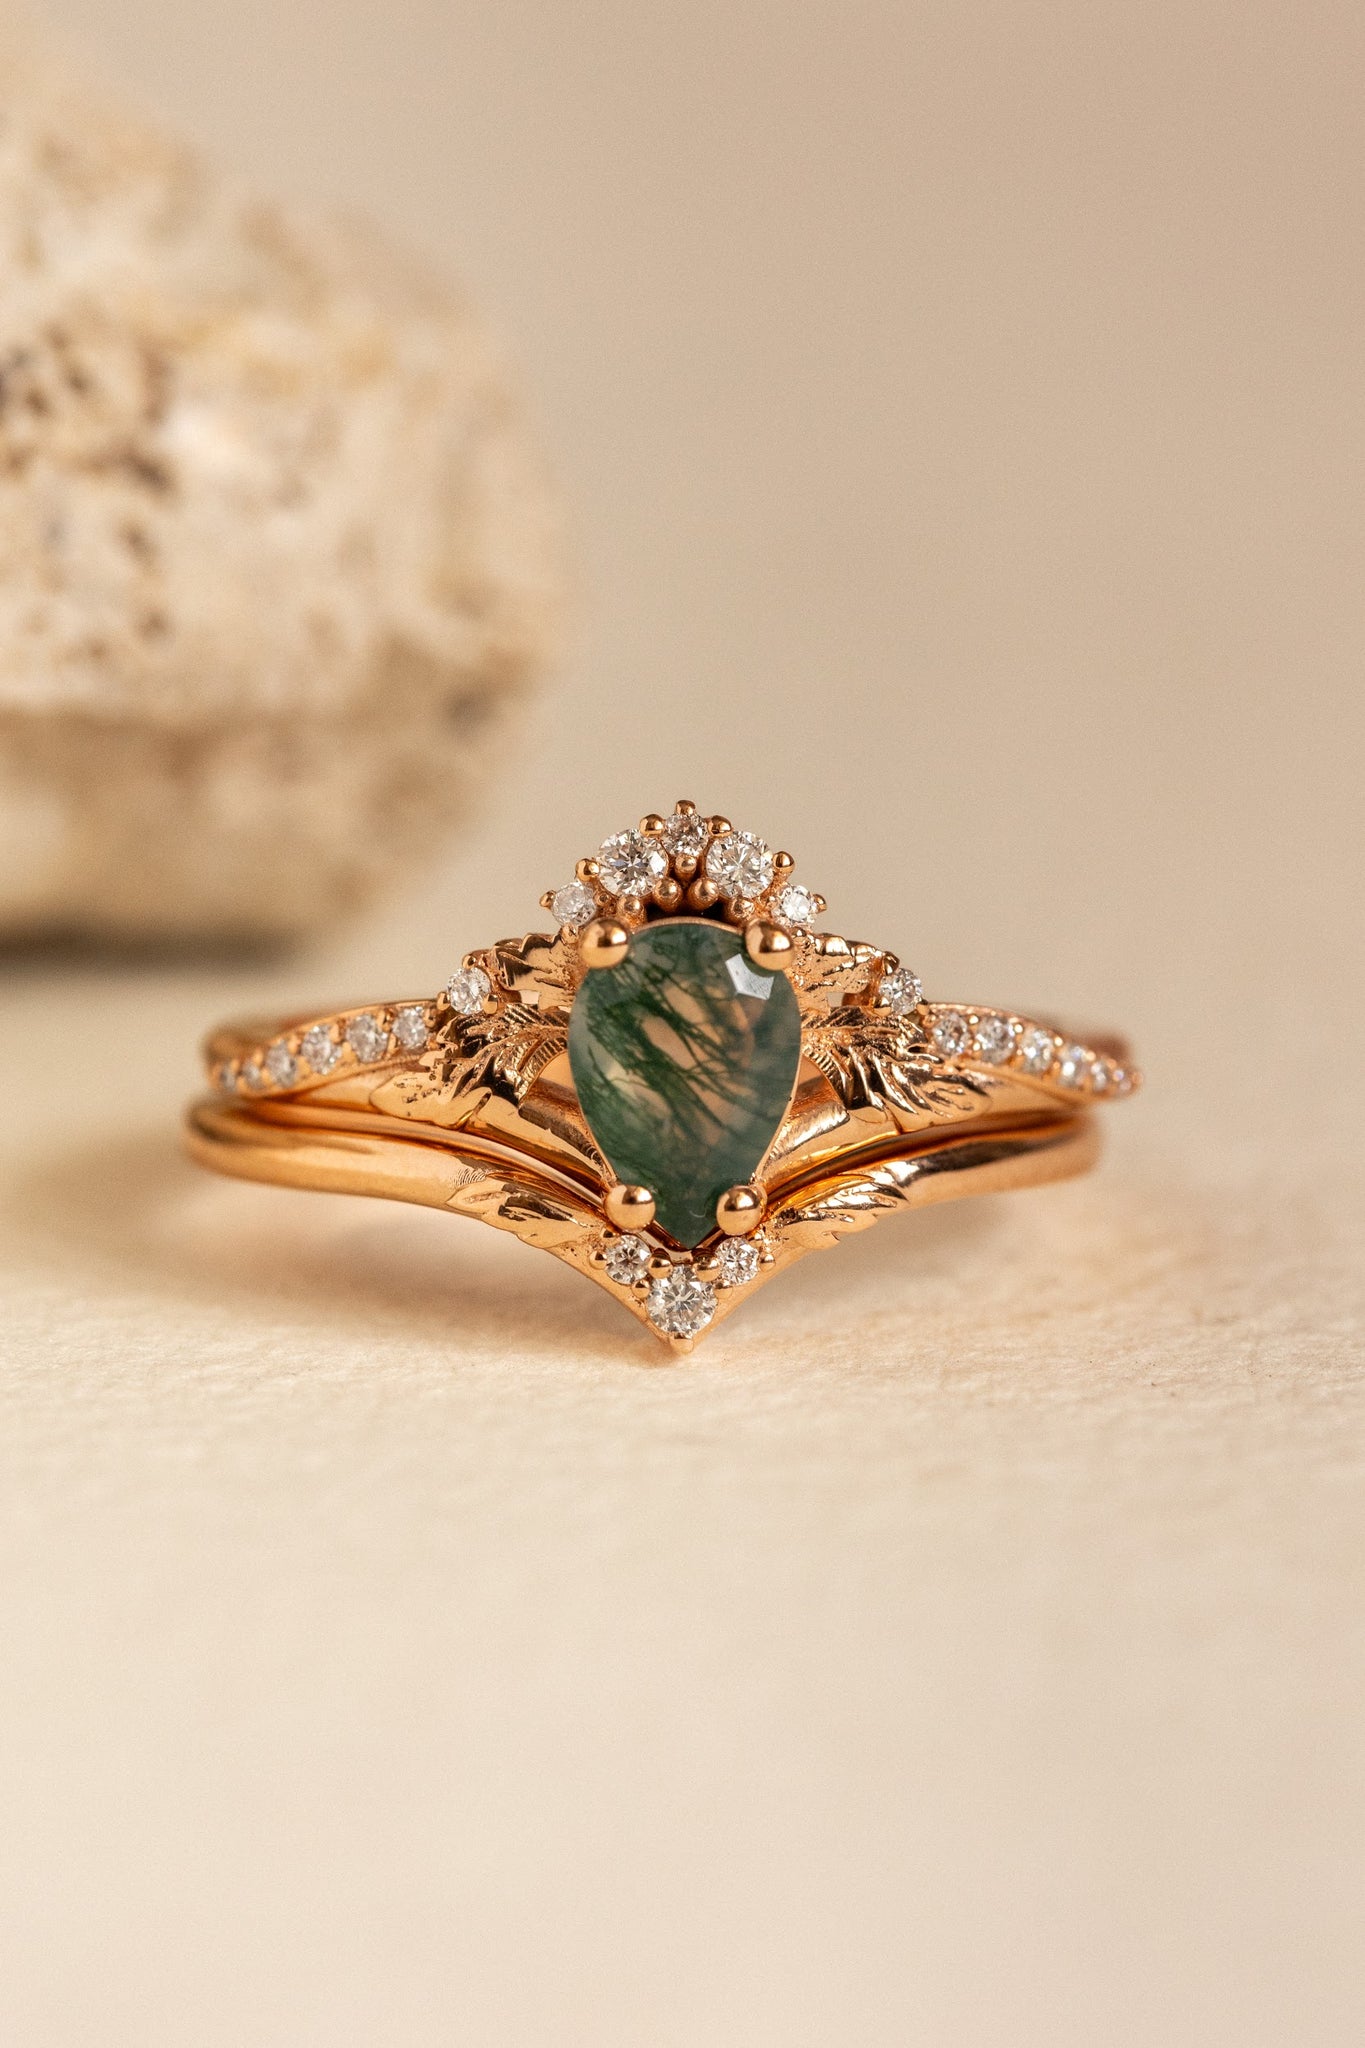 Forest-themed bridal ring set with green moss agate / Amelia - Eden Garden Jewelry™